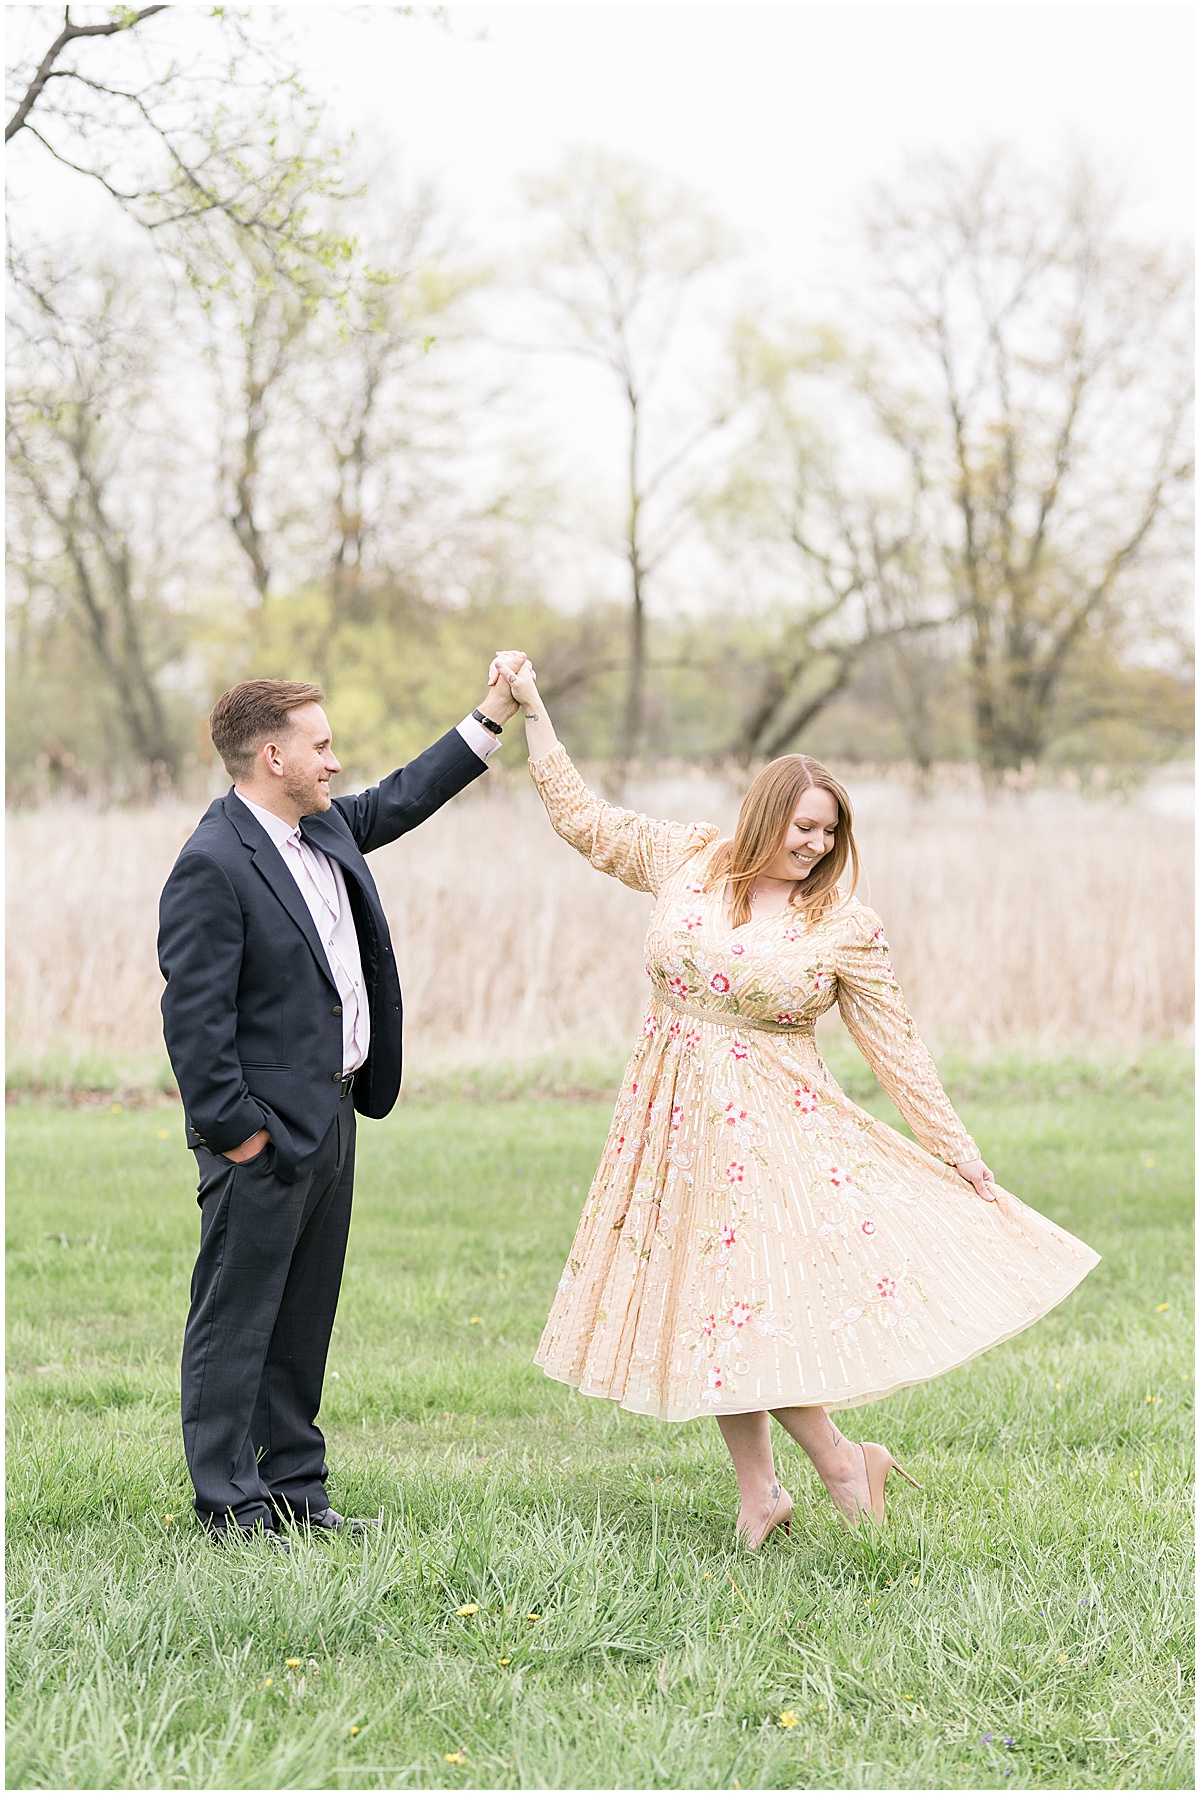 Couple twirling in field during engagement photos at Wildcat Creek Reservoir Park in Kokomo, Indiana